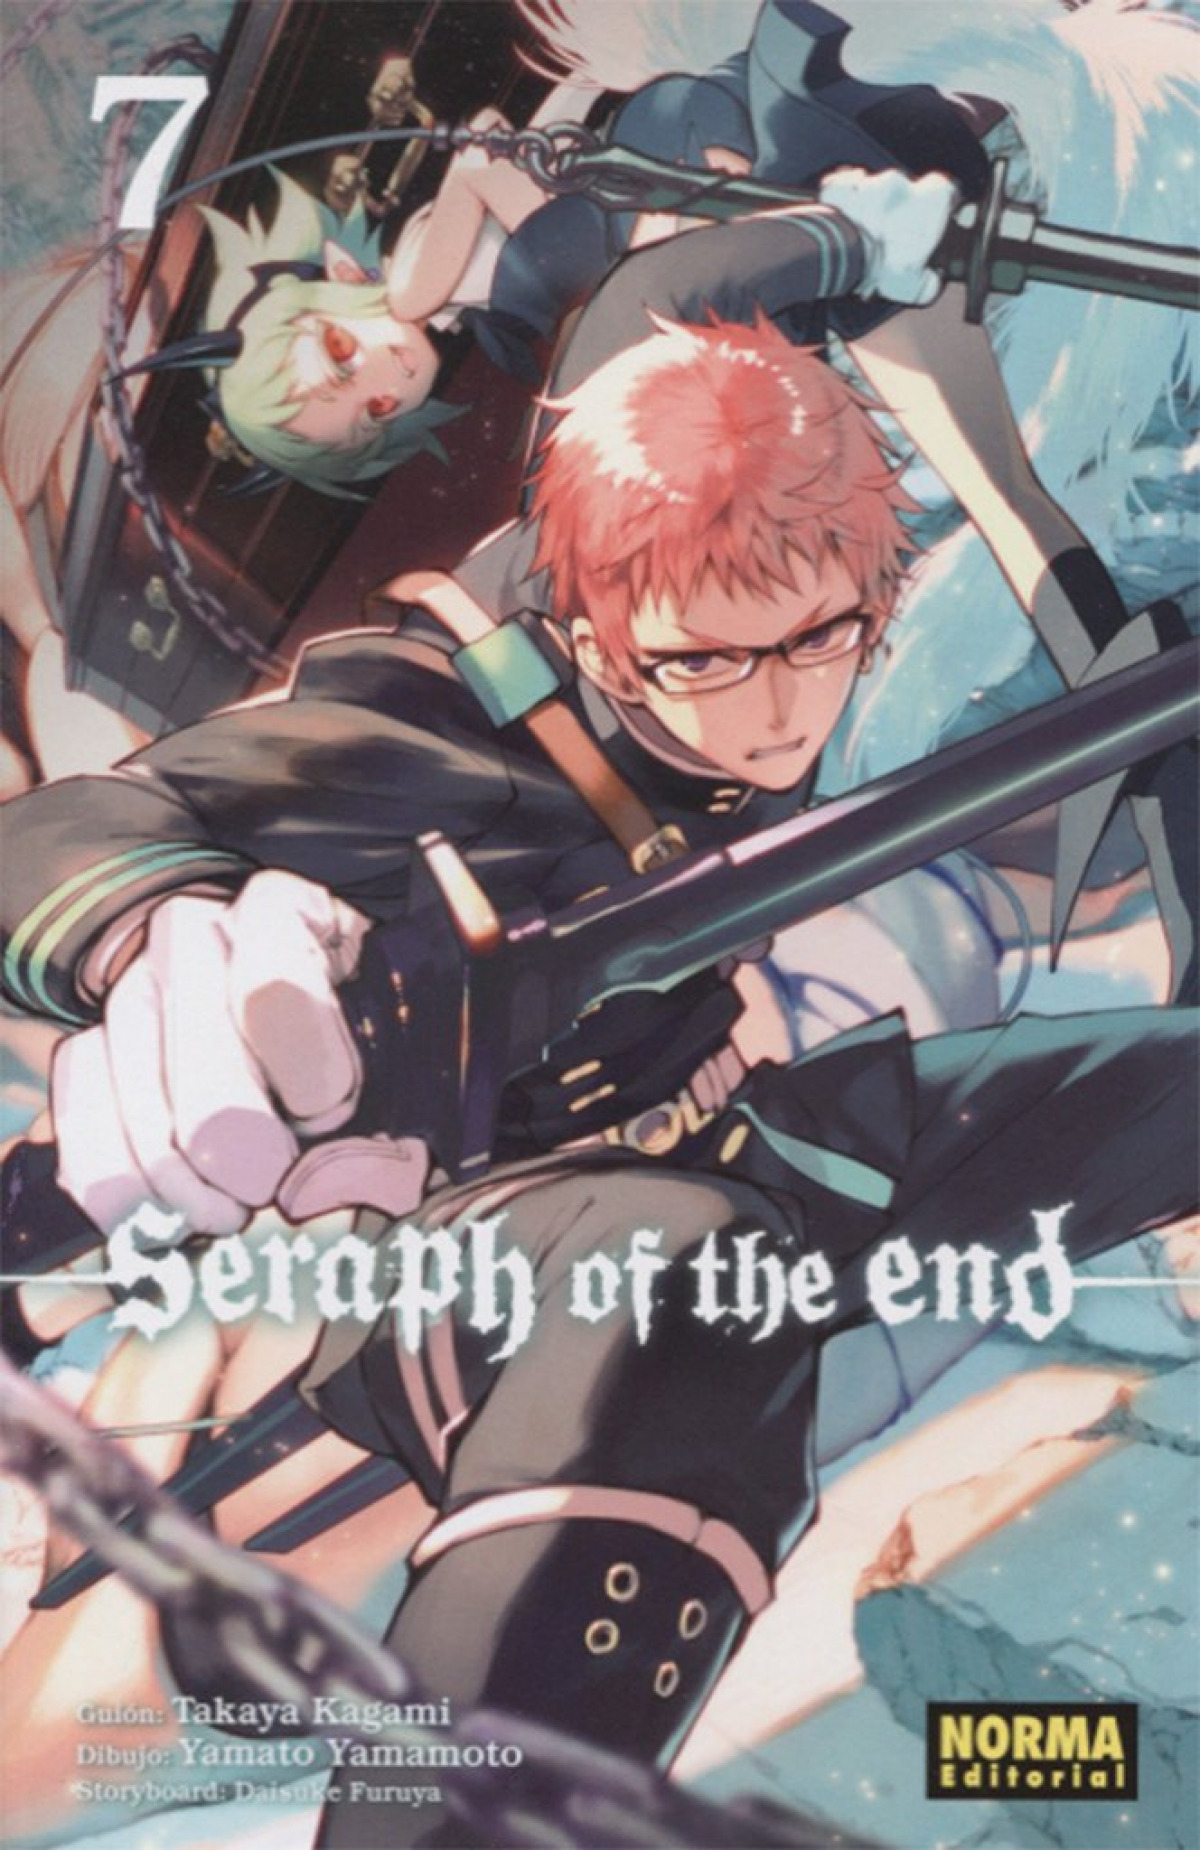 Seraph of the end 7 - Vv.Aa.